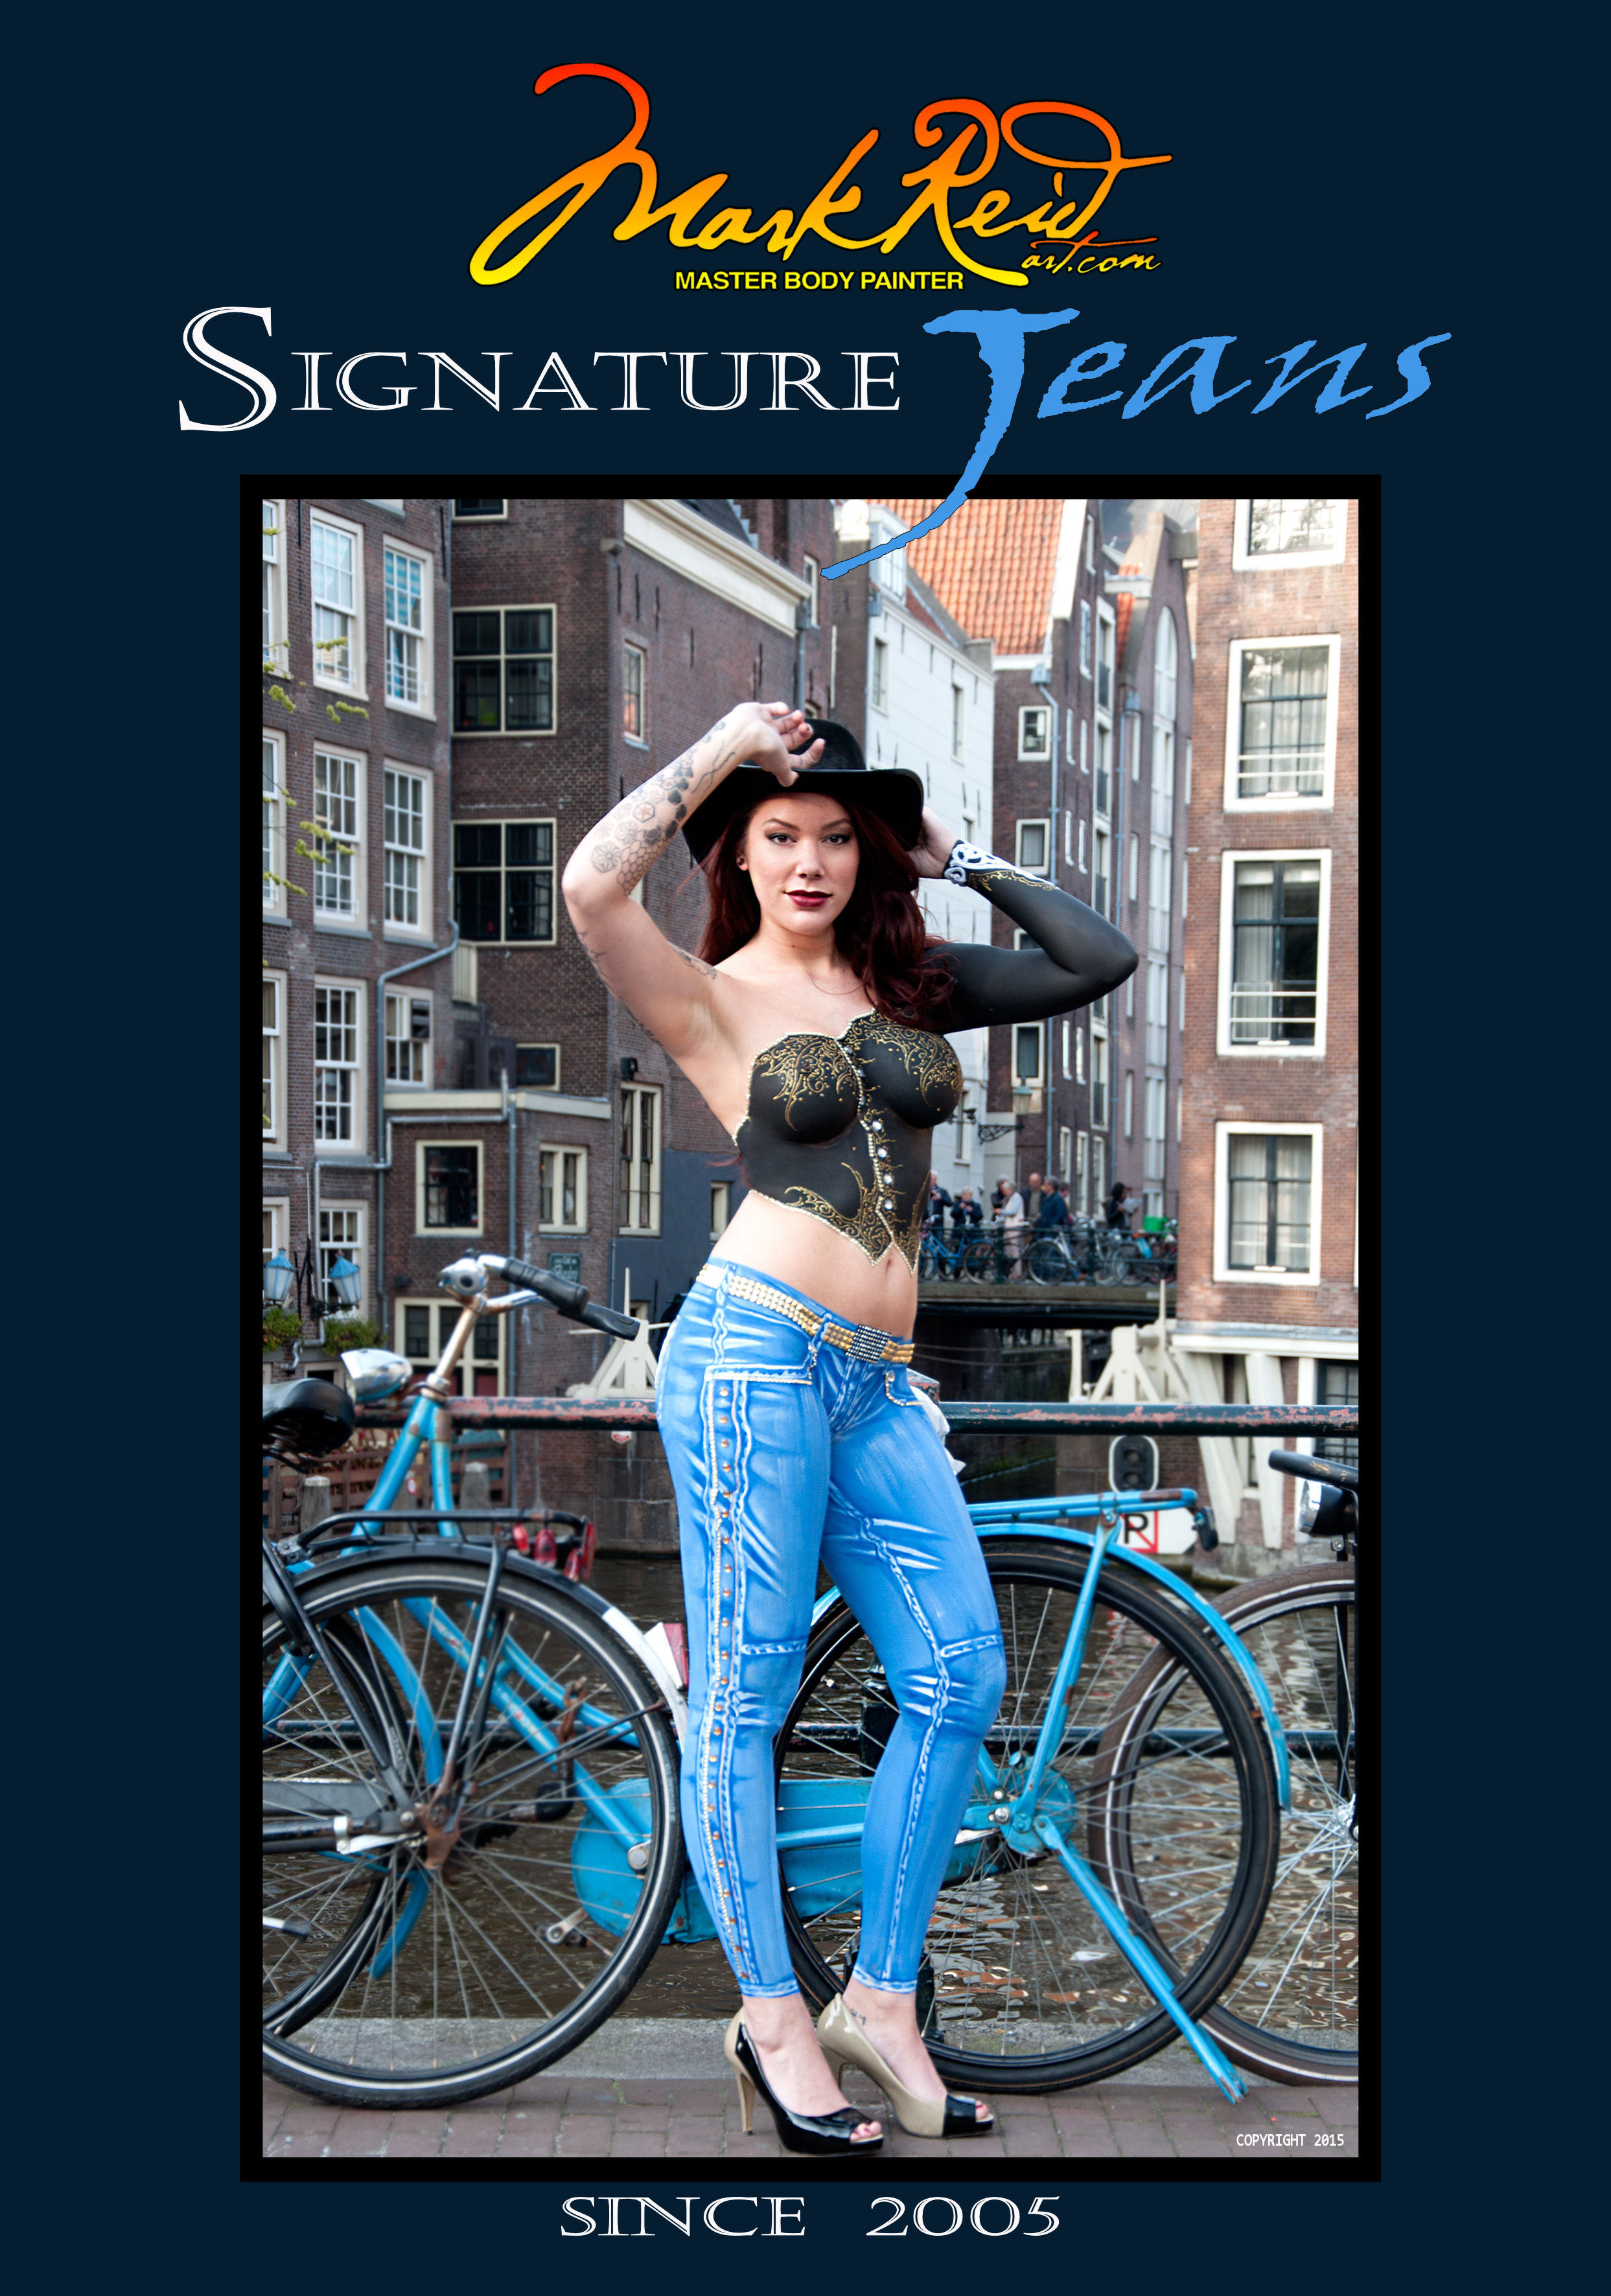 Book cover for Mark Reid Signature Jeans. It features a dark haired woman with a black corset and detailed jeans painted on her in front of some bikes and buildings